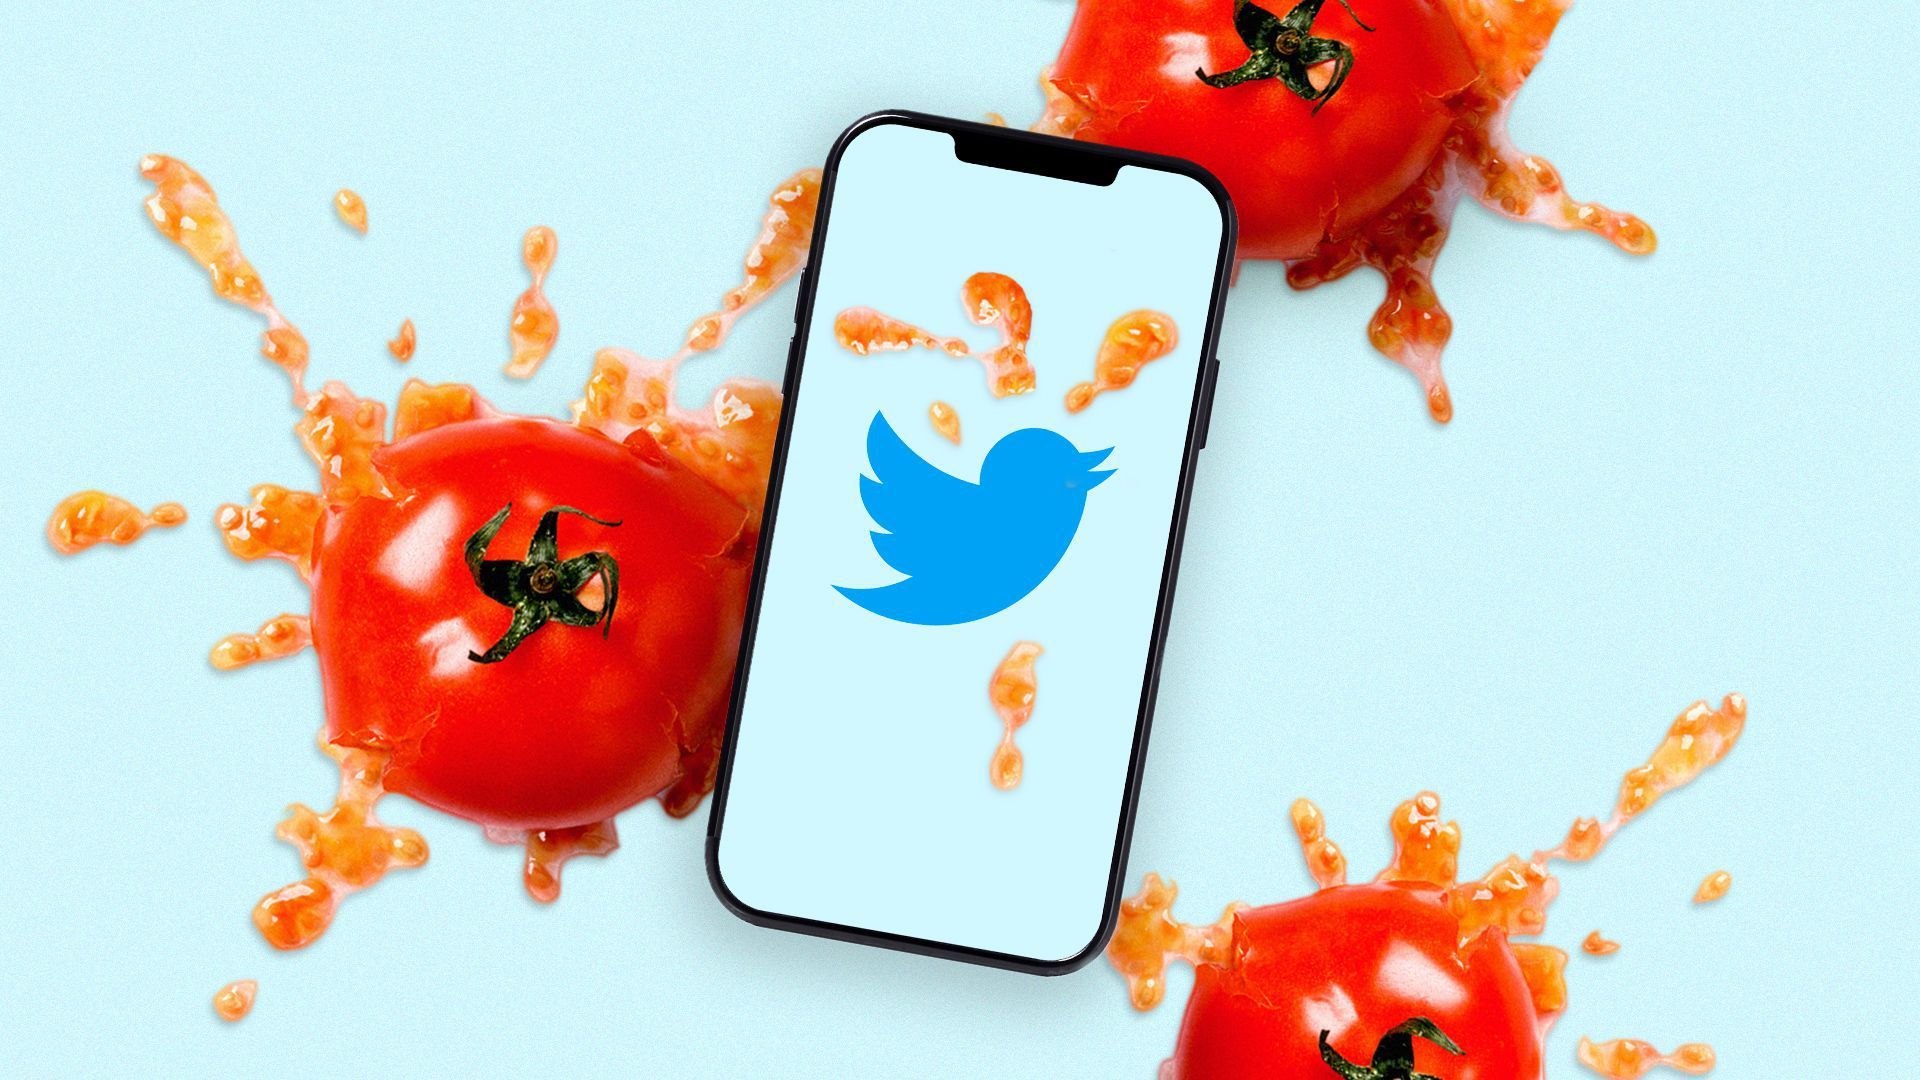 A phone with tomatoes by the screen and twitter opened